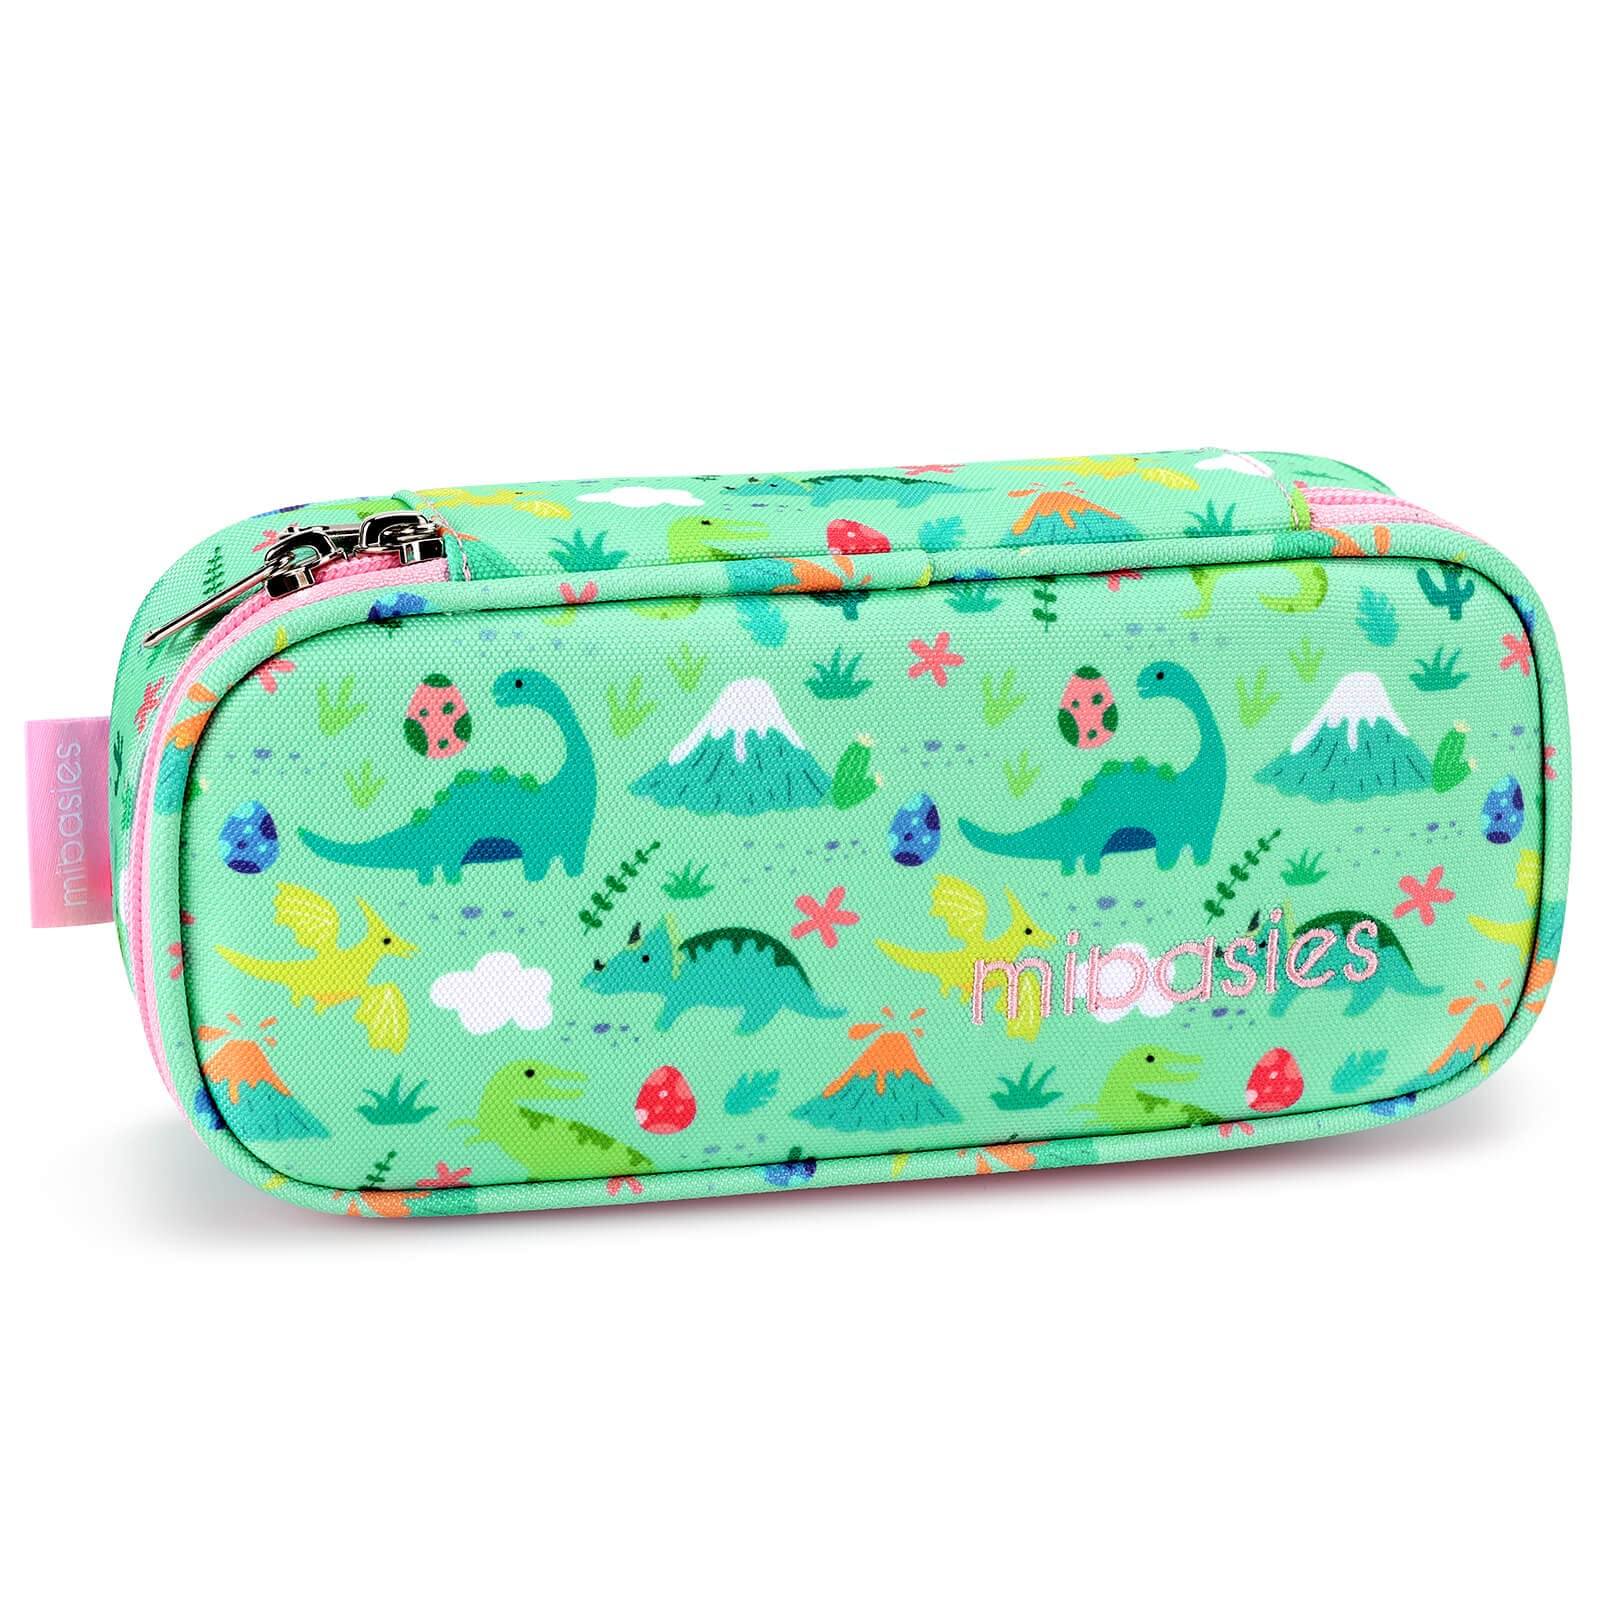 FUN FOR SPRING Pencil Pouch Mibasies Light Green Dinosaur Forset 